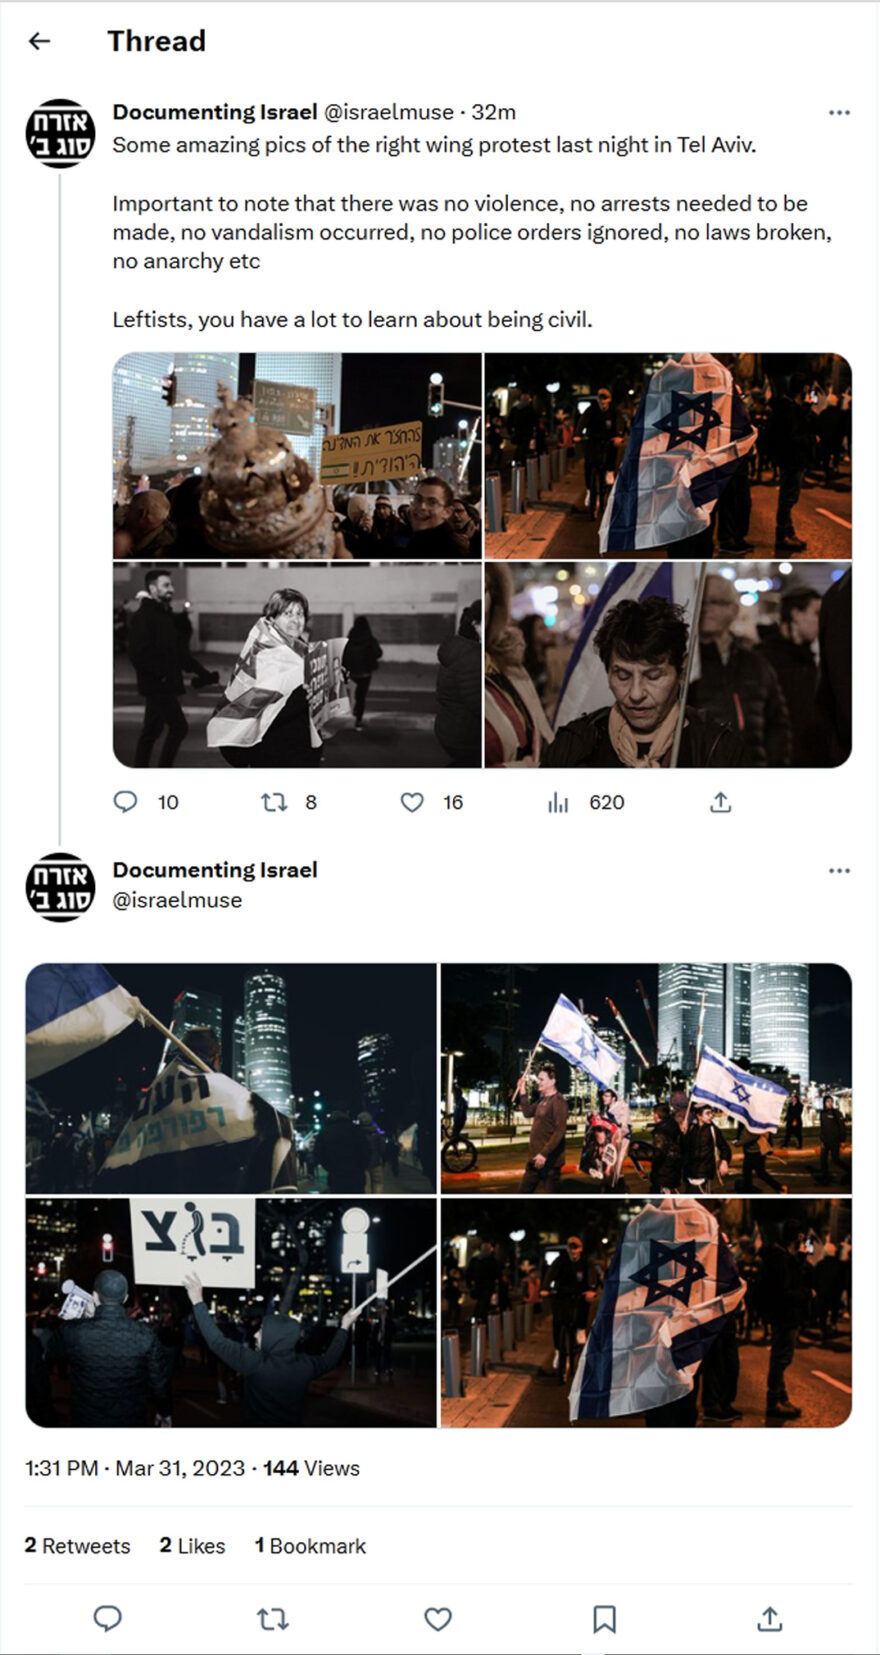 Documenting Israel-tweet-31March2023-Some amazing pics of the right wing protest last night in Tel Aviv